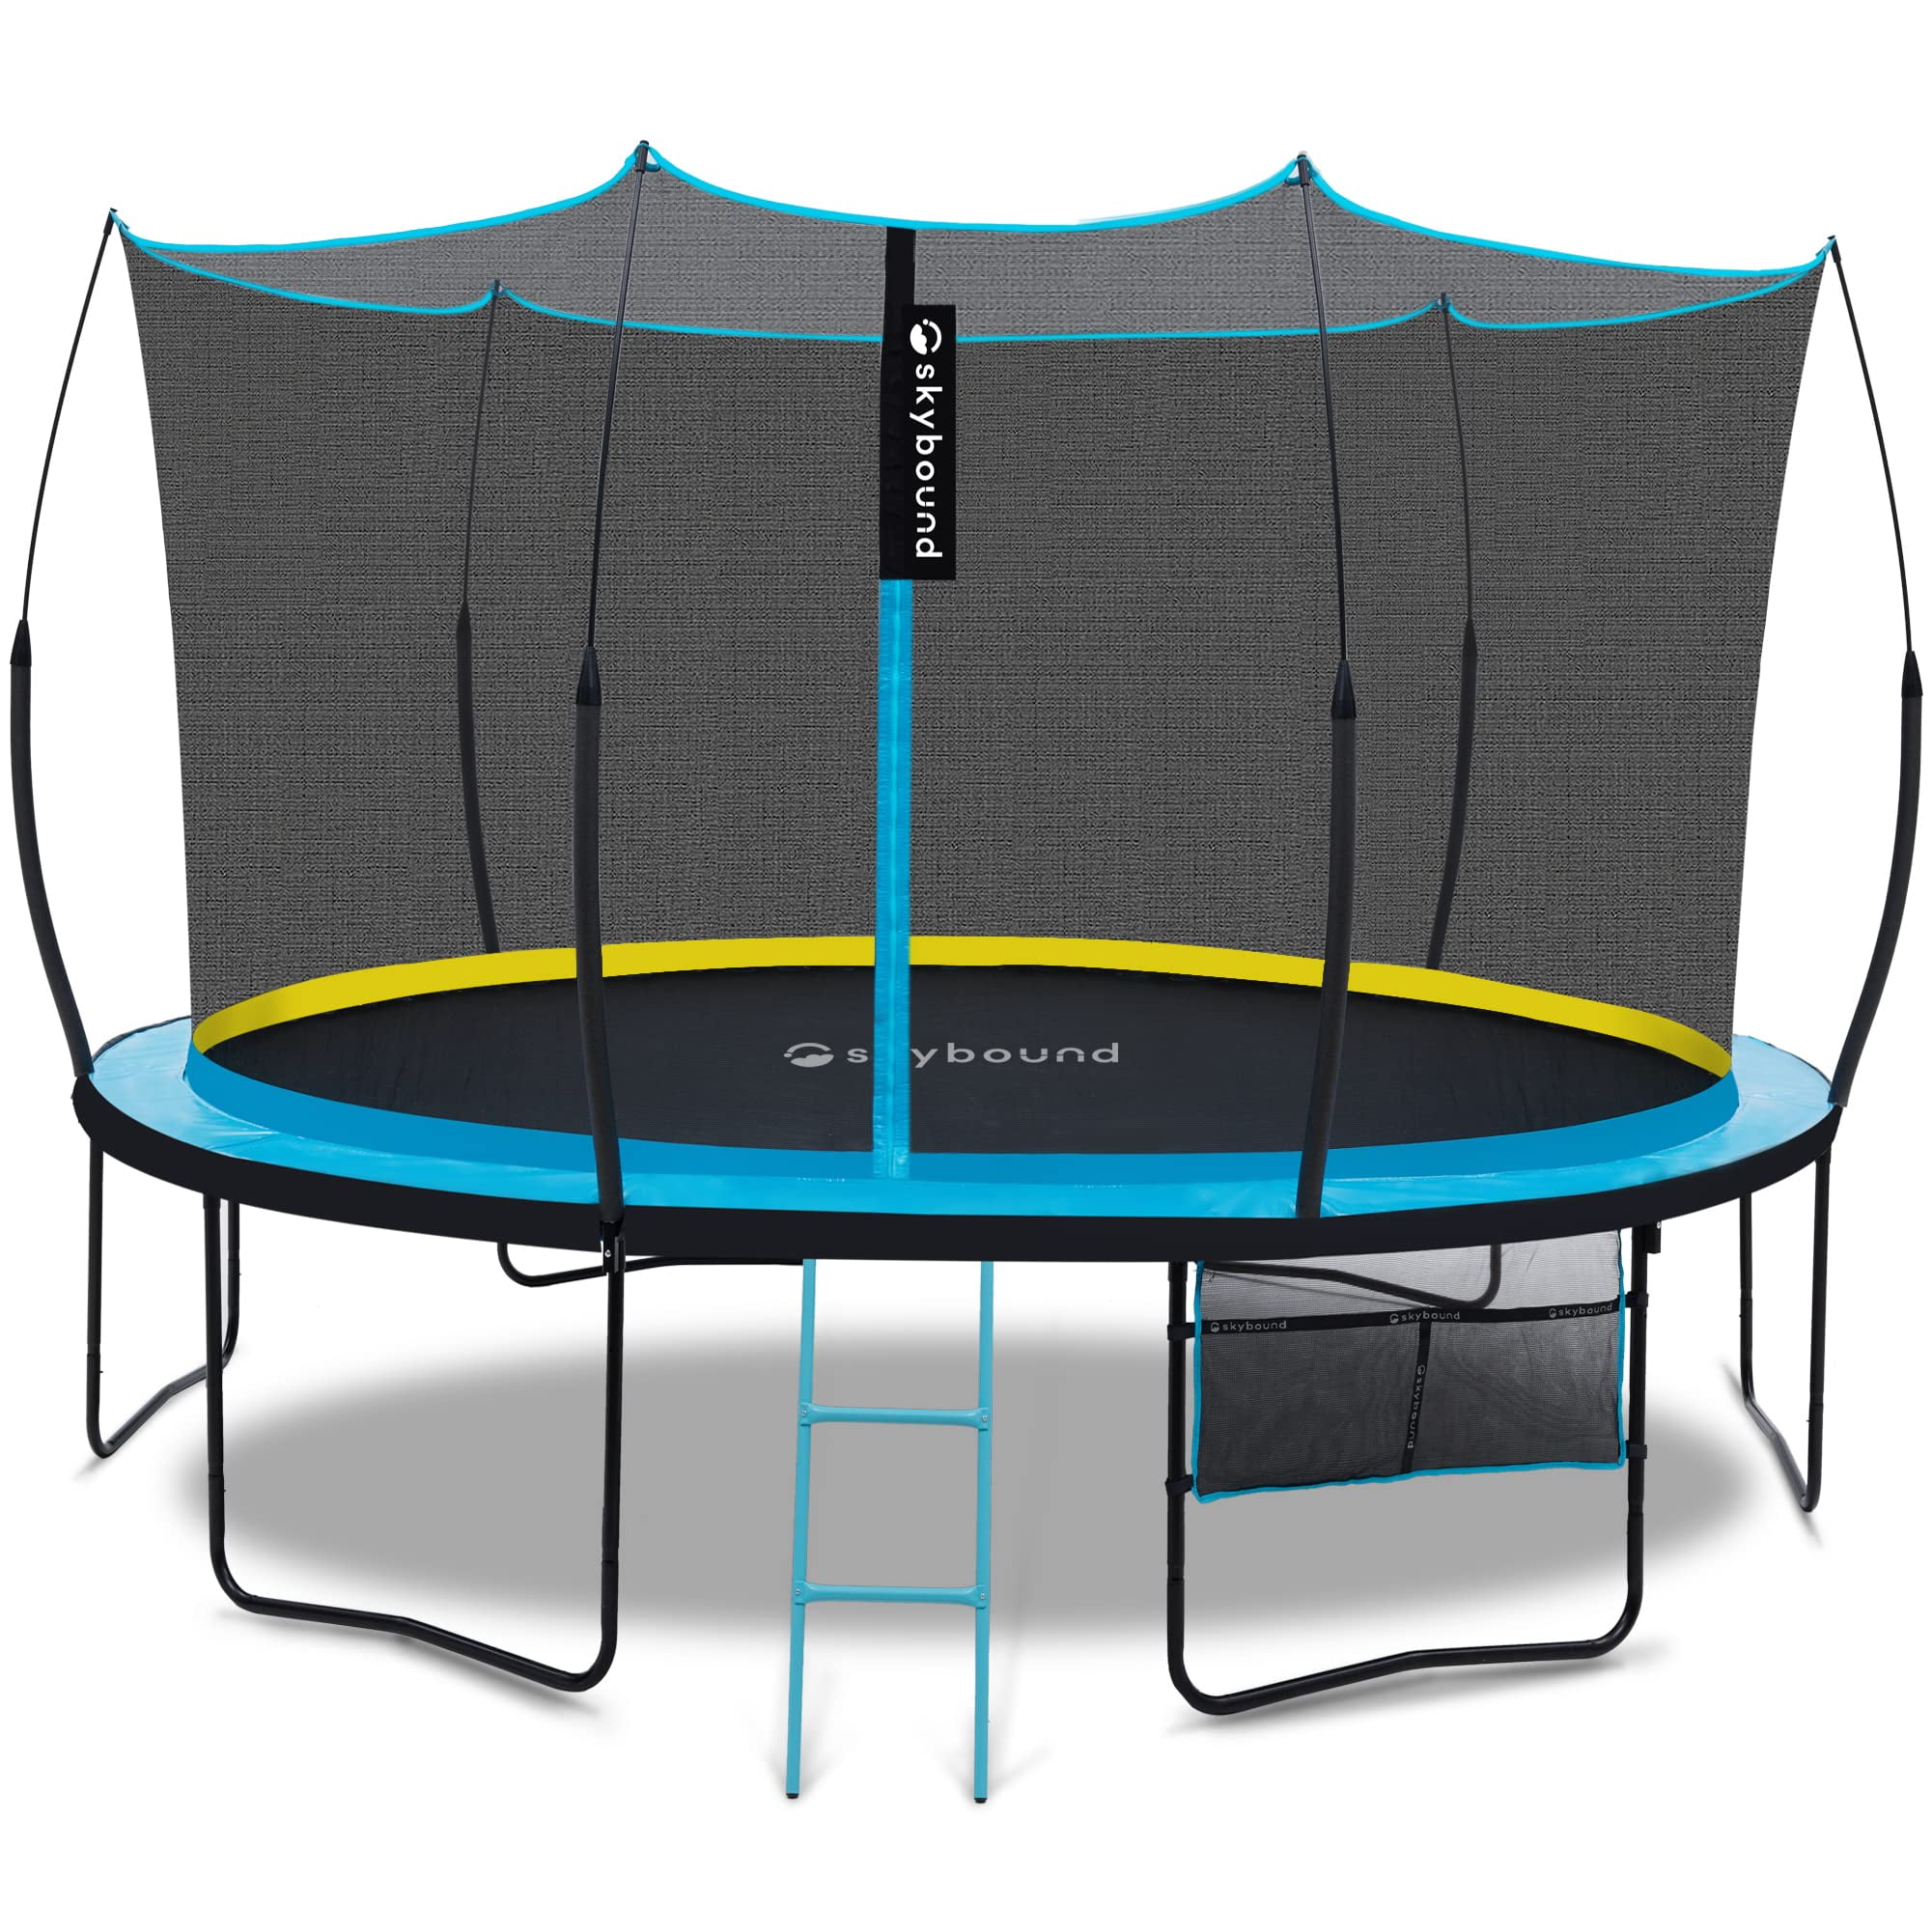 SkyBound 10FT 12FT 14FT Trampoline with - Recreational Trampolines Kids and Adults with Patented Fiberglass Curved Poles - Outdoor Trampoline with Ladder - Rust ASTM Approved - Walmart.com